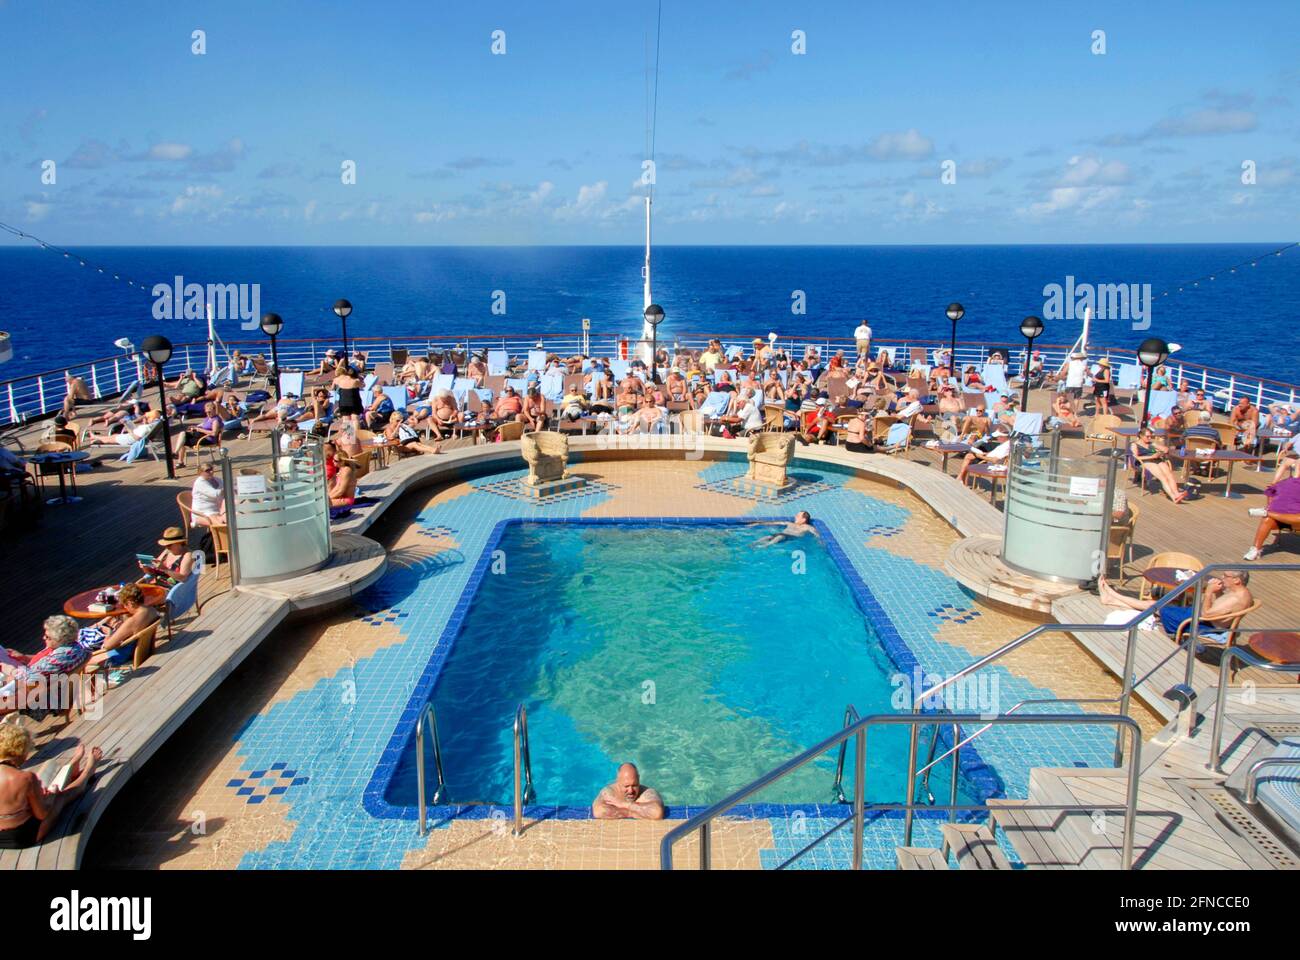 Crowd of passengers sitting around the swimming pool on a cruise ship in the Caribbean Stock Photo